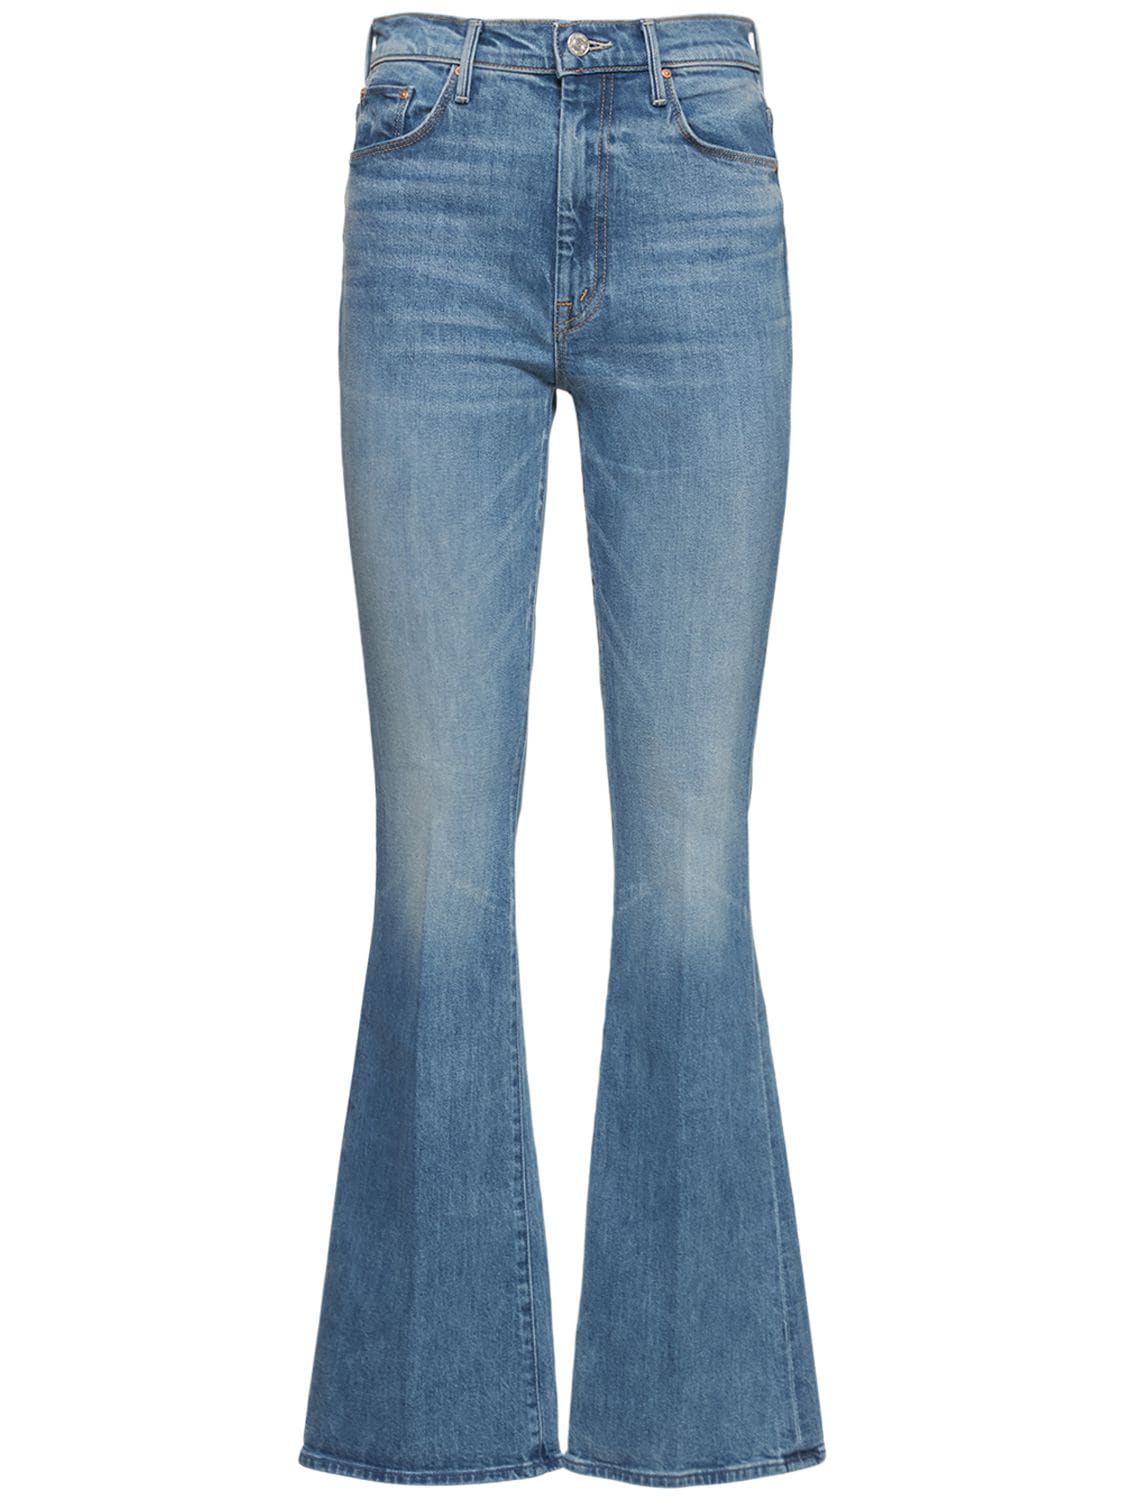 MOTHER THE HIGH WEEKENDER JEANS